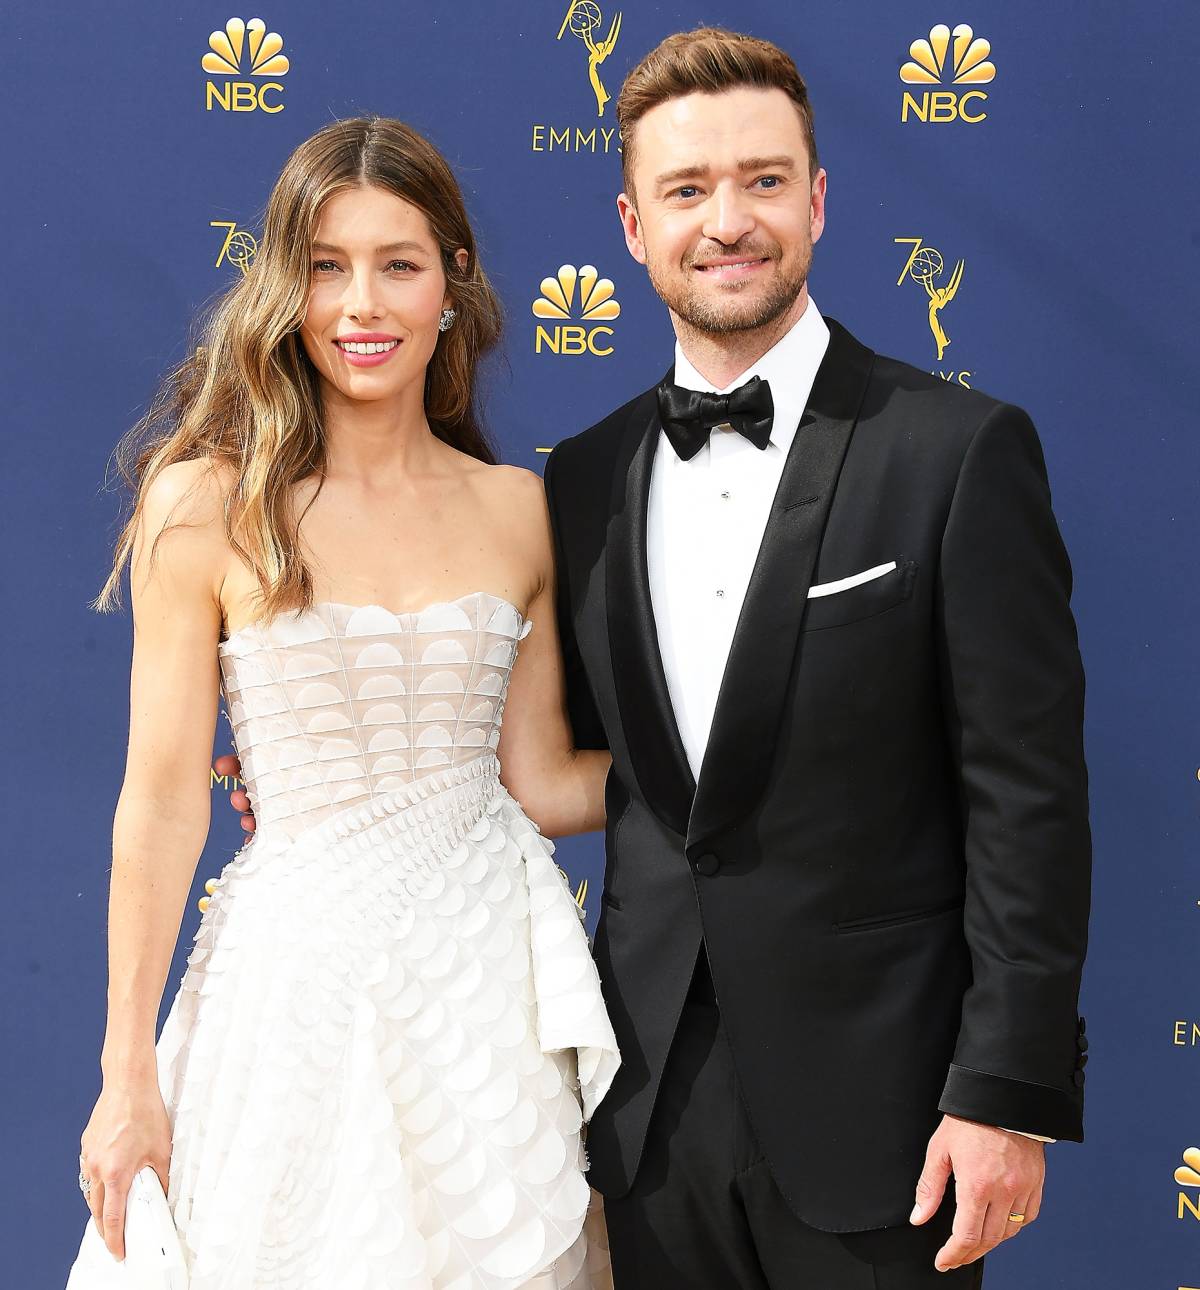 Jessica Biel: Justin Timberlake Didn't Get Paid for 'Candy' Role